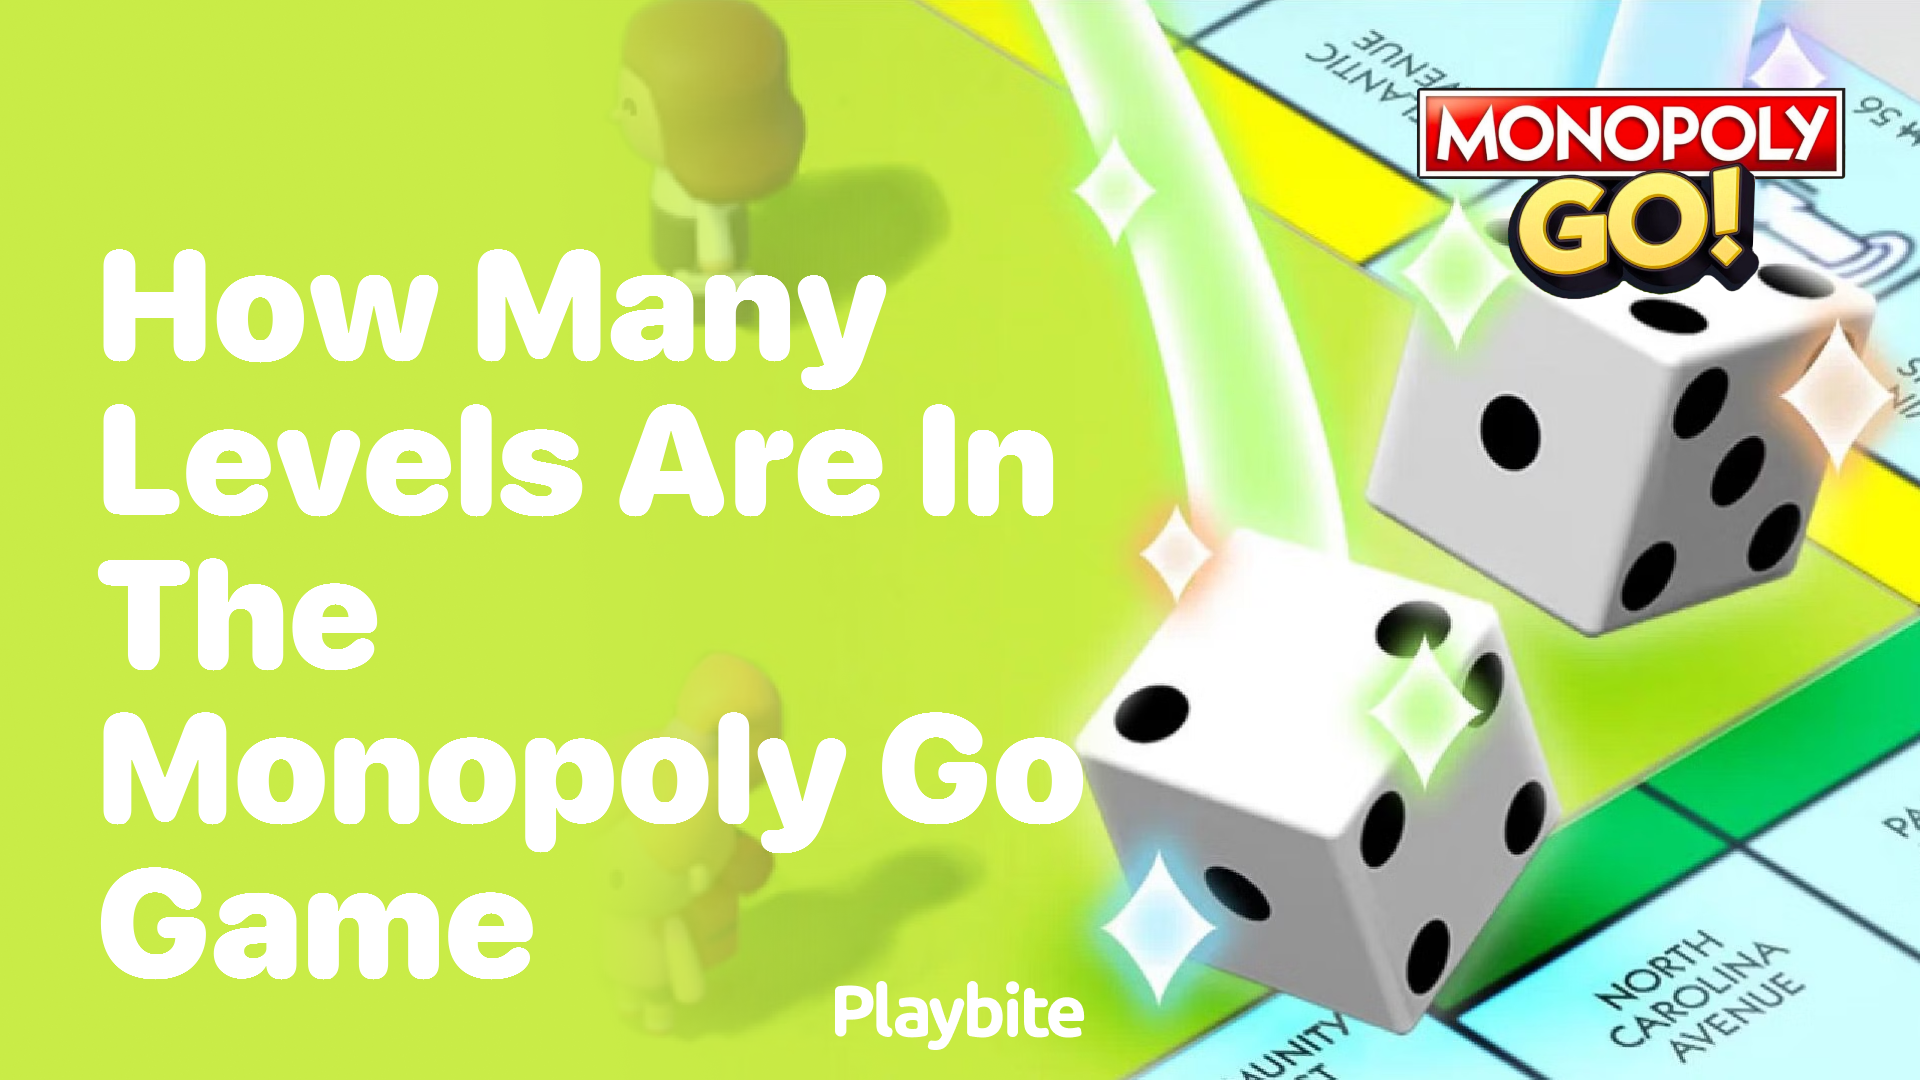 How Many Levels Are in the Monopoly Go Game?